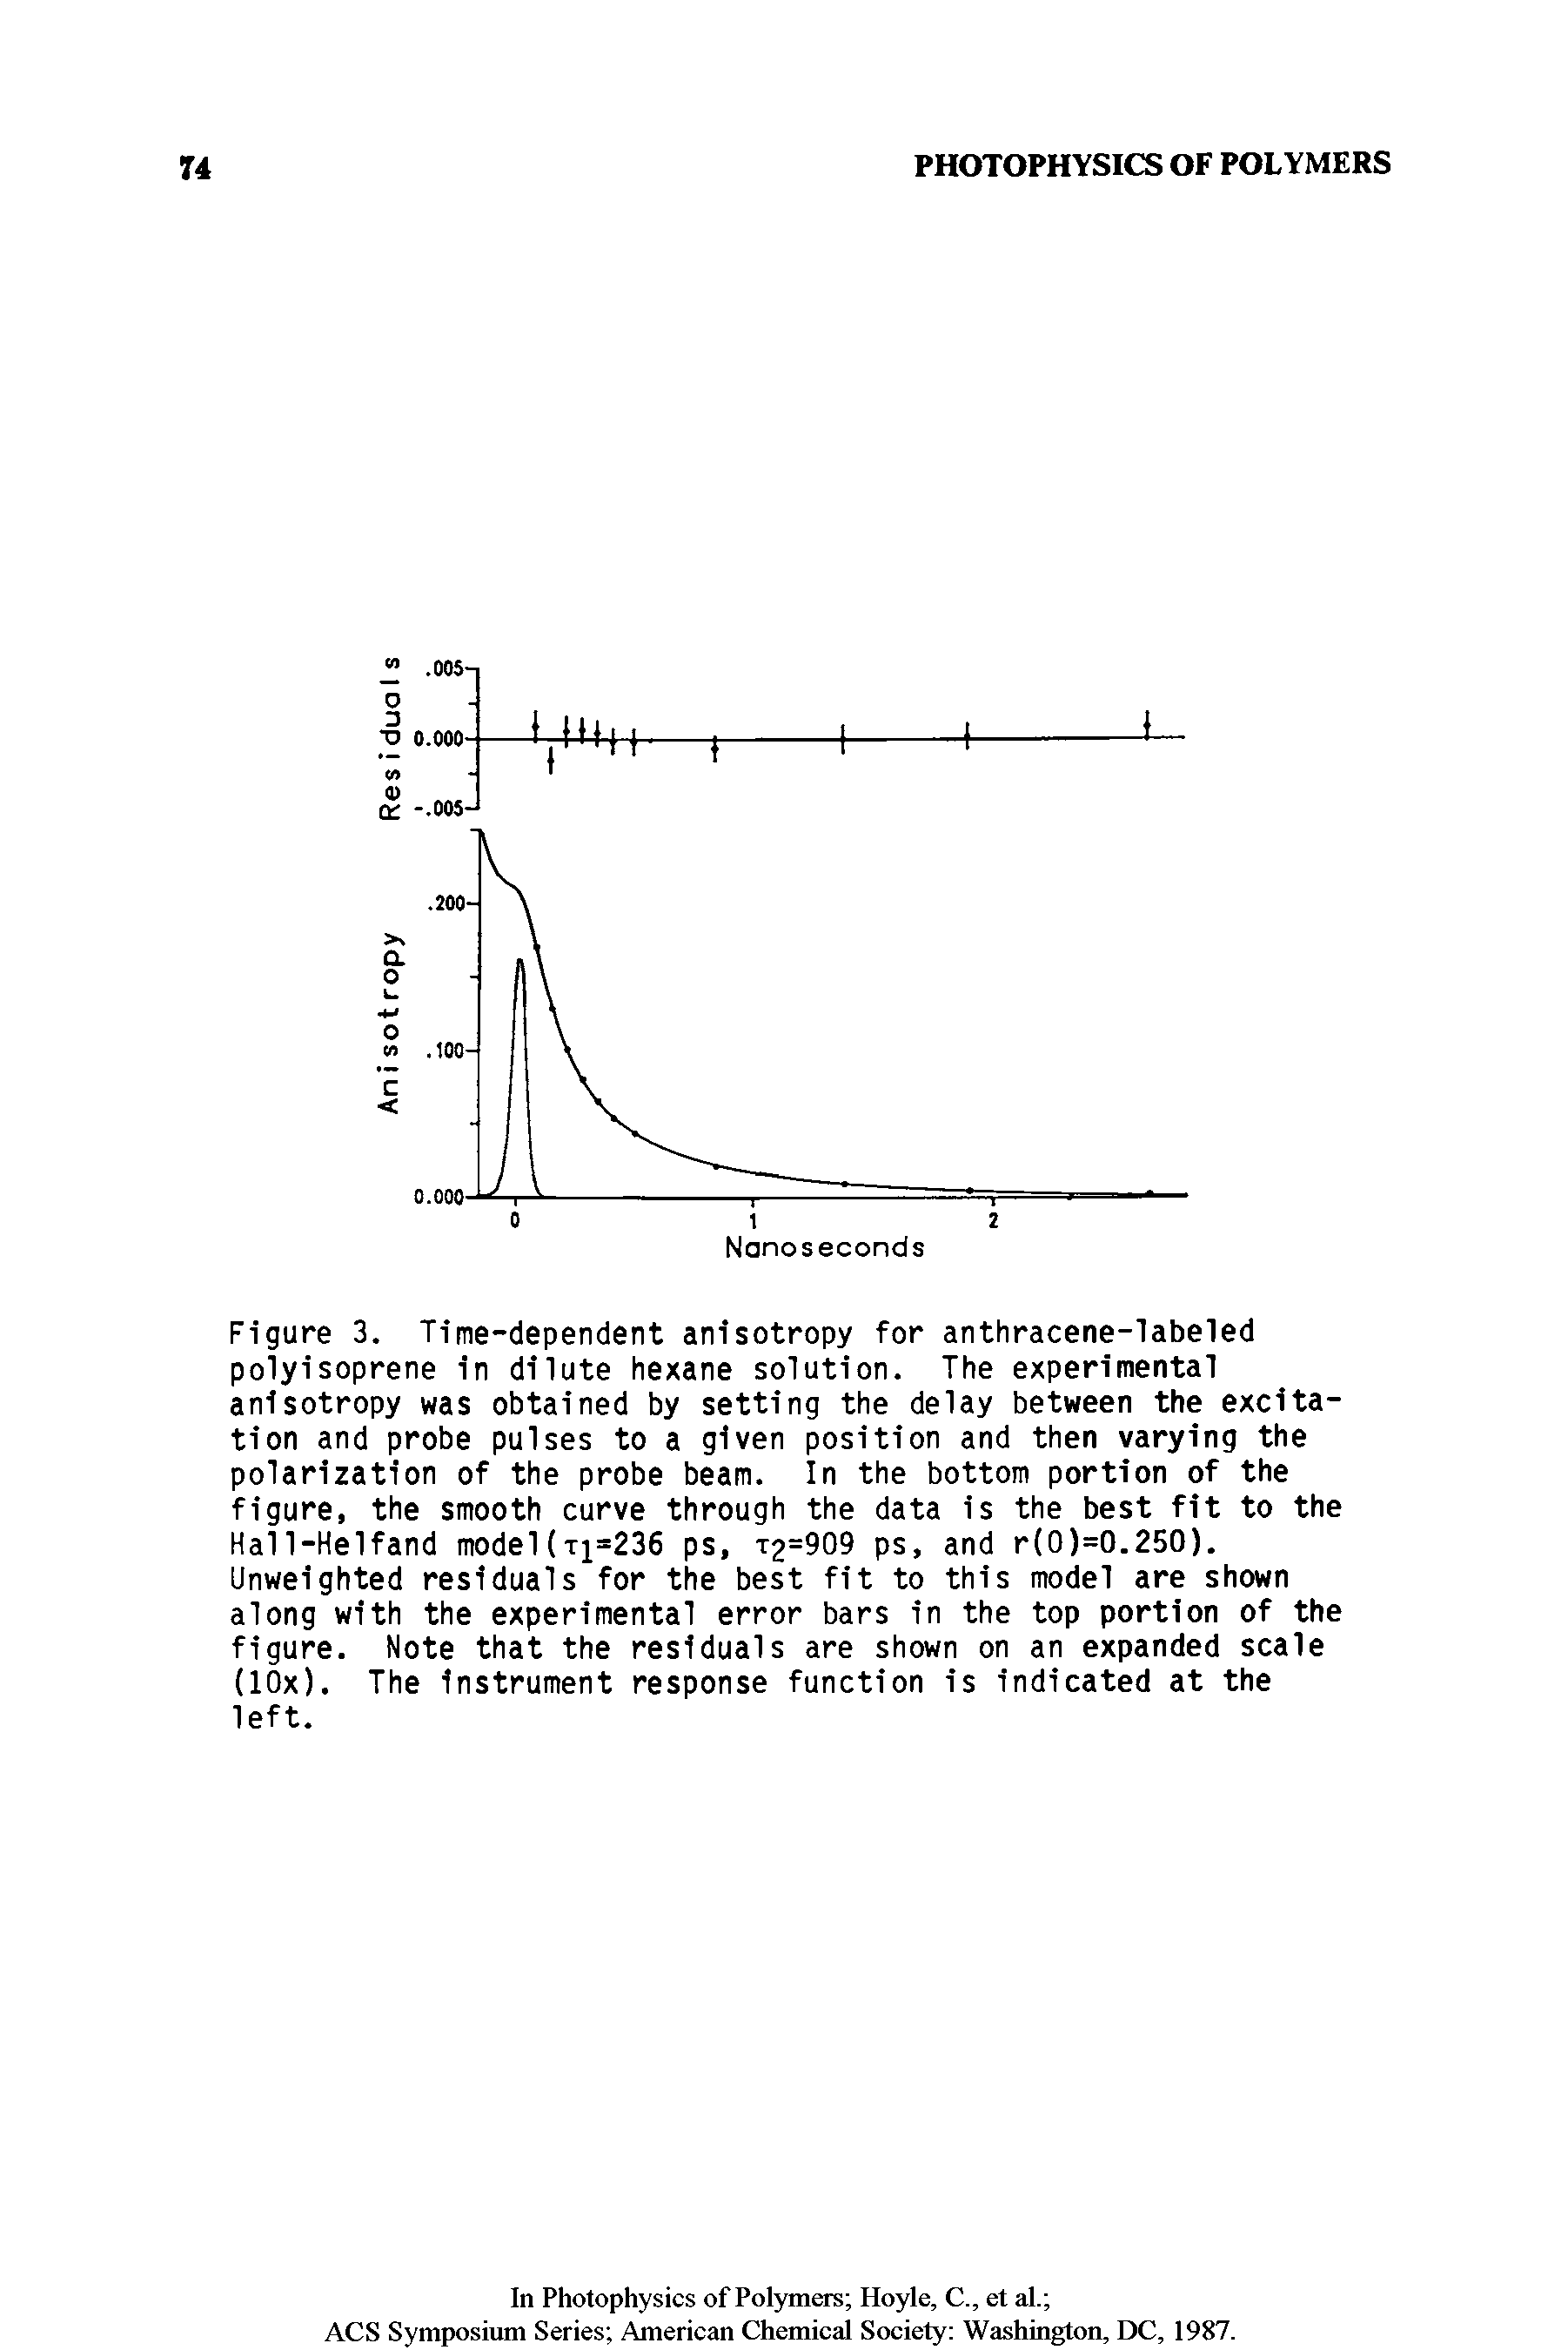 Figure 3. Time-dependent anisotropy for anthracene-labeled polyisoprene in dilute hexane solution. The experimental anisotropy was obtained by setting the delay between the excitation and probe pulses to a given position and then varying the polarization of the probe beam. In the bottom portion of the figure, the smooth curve through the data is the best fit to the Hall-Helfand model(Ti=236 ps, t2=909 ps, and r(0)=0.250). Unweighted residuals for the best fit to this model are shown along with the experimental error bars in the top portion of the figure. Note that the residuals are shown on an expanded scale (lOx). The instrument response function is indicated at the left.